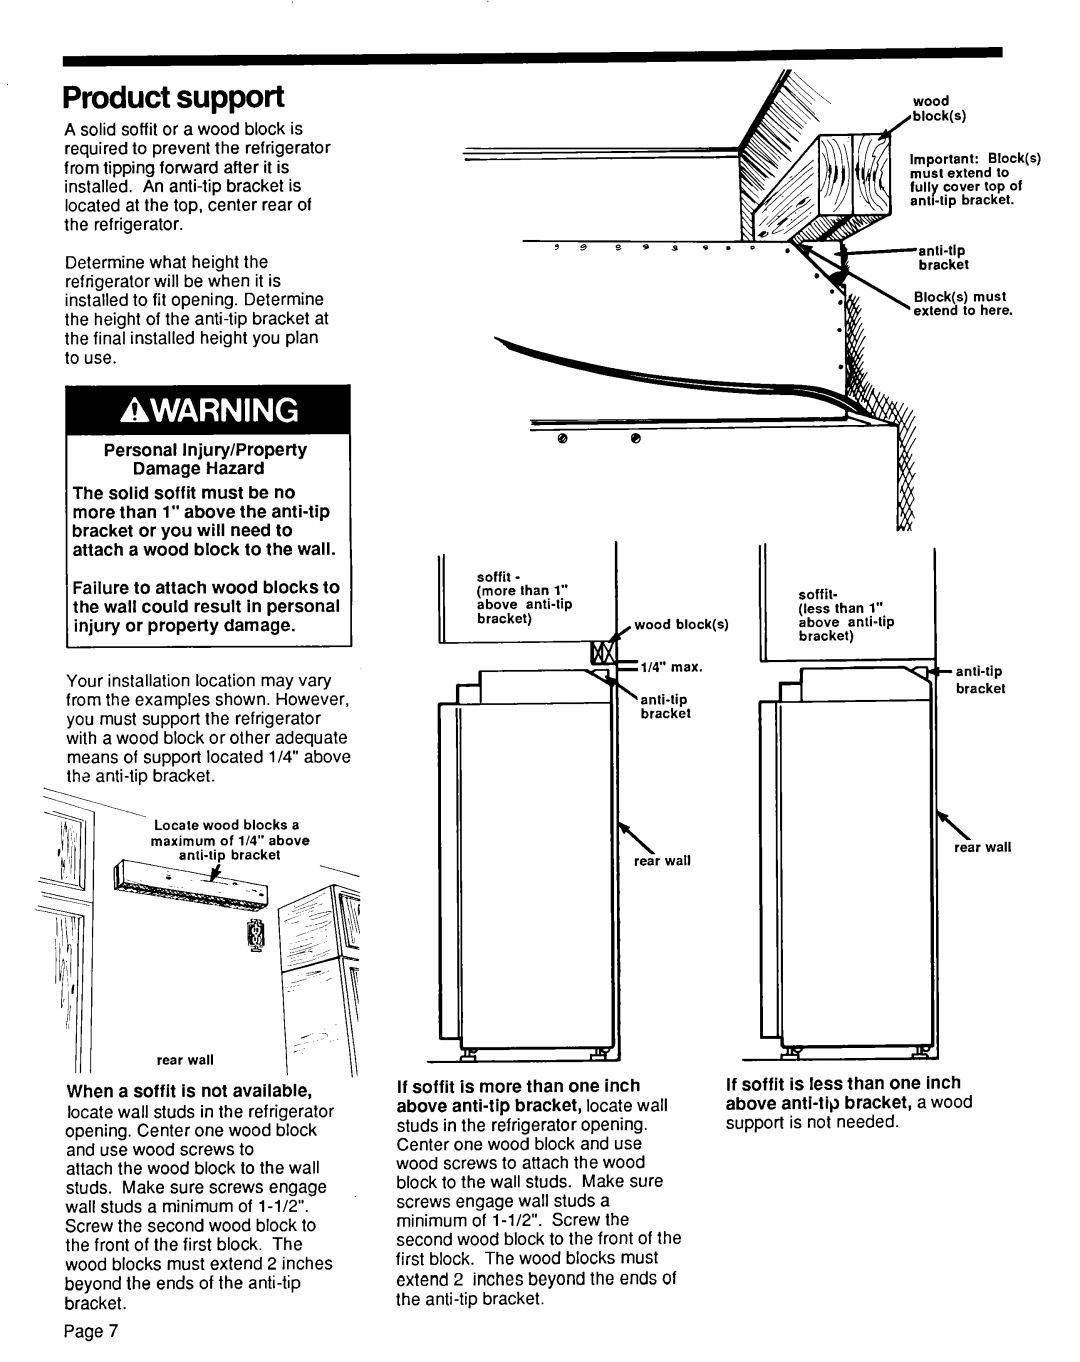 KitchenAid KSRF36DT manual Product support, Personal Injury/Property Damage Hazard, When a soffit is not available 